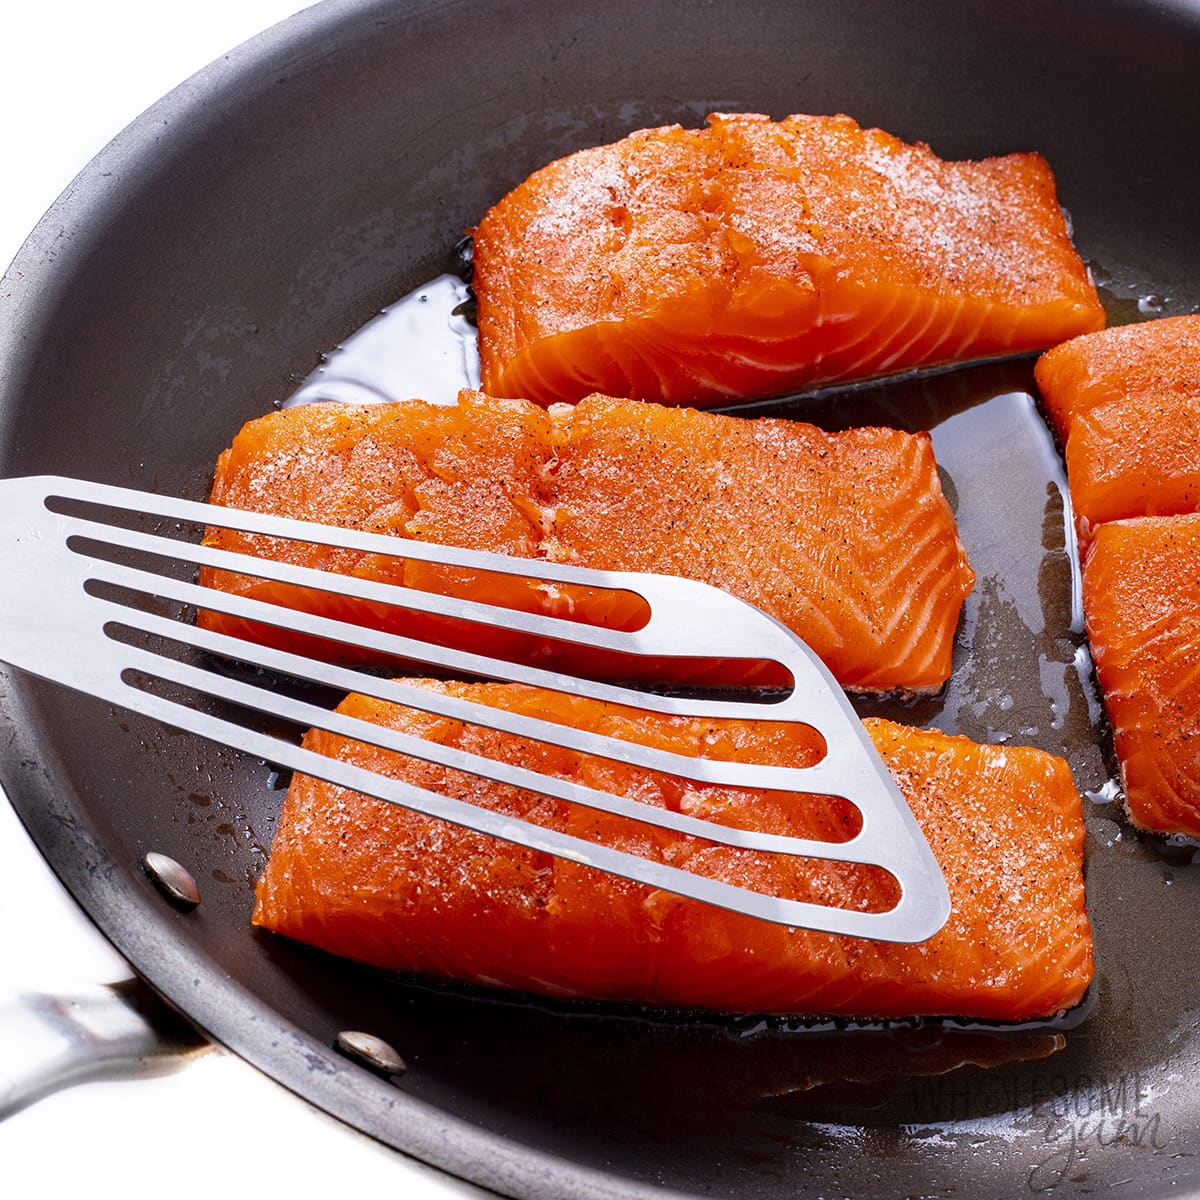 Salmon fillets searing in pan with fish spatula pressing one fillet down.